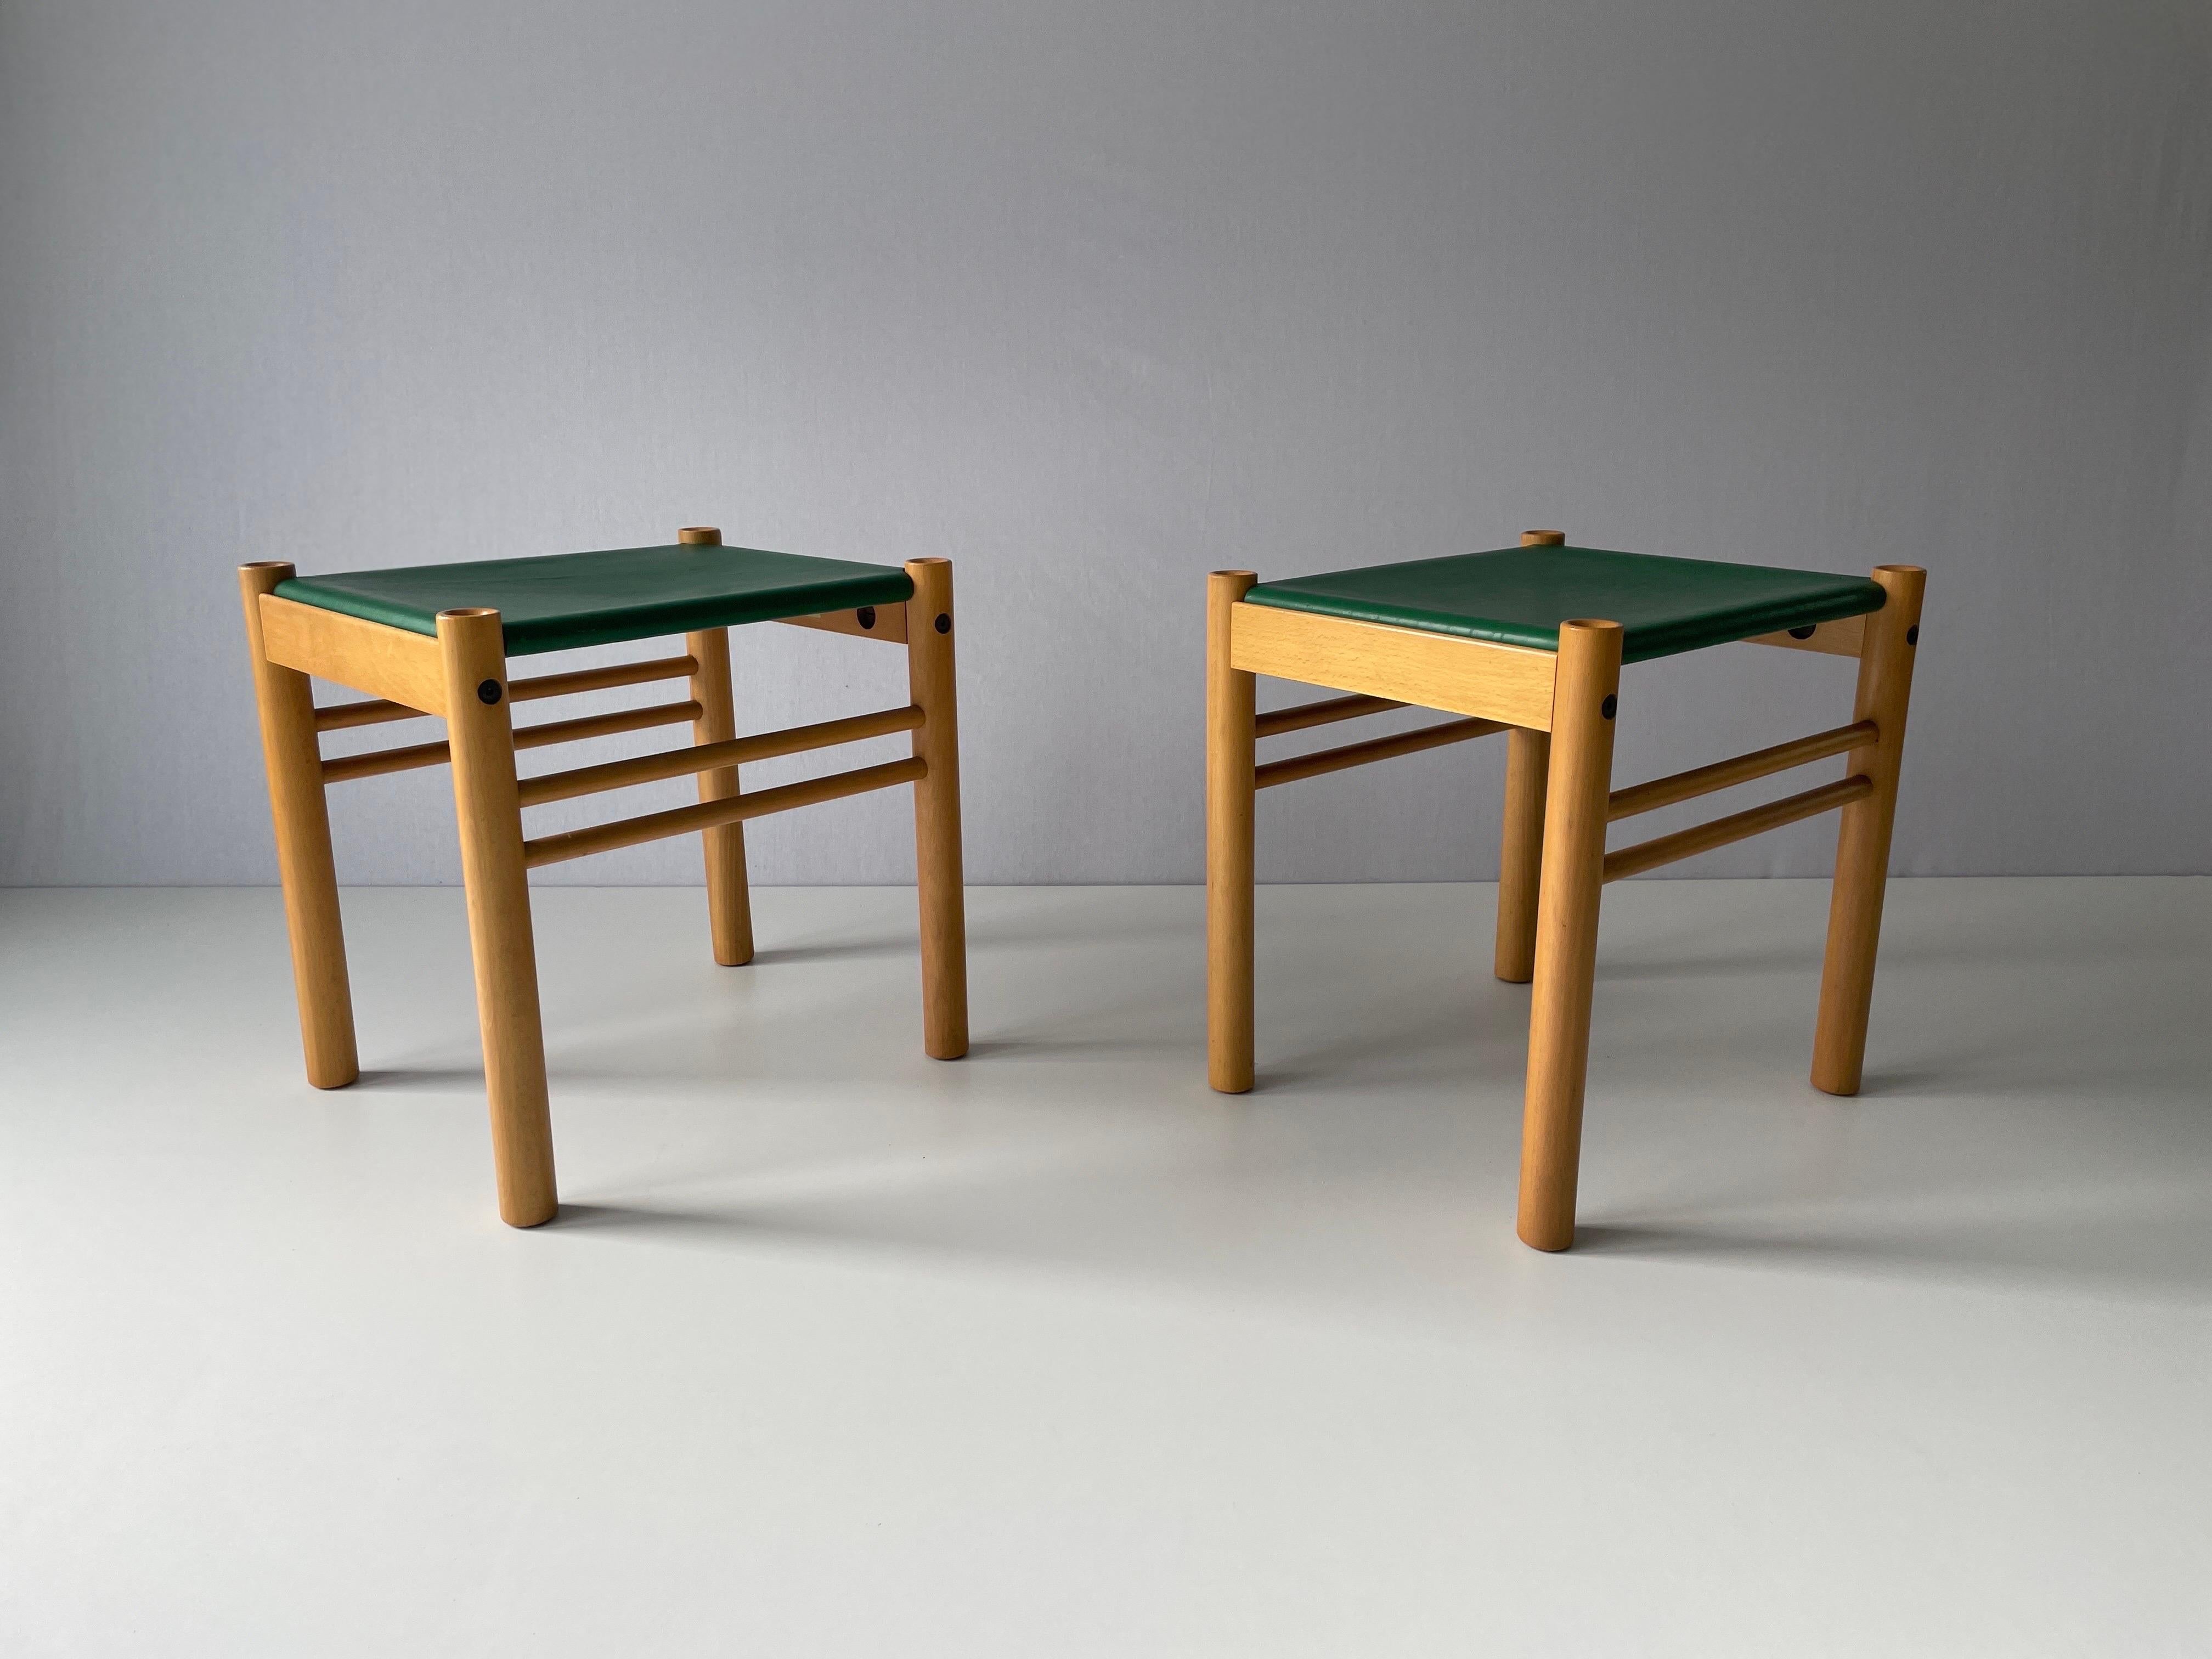 Green Leather and Birch Wood Pair of Stools by IBISCO, 1970s, Italy For Sale 5